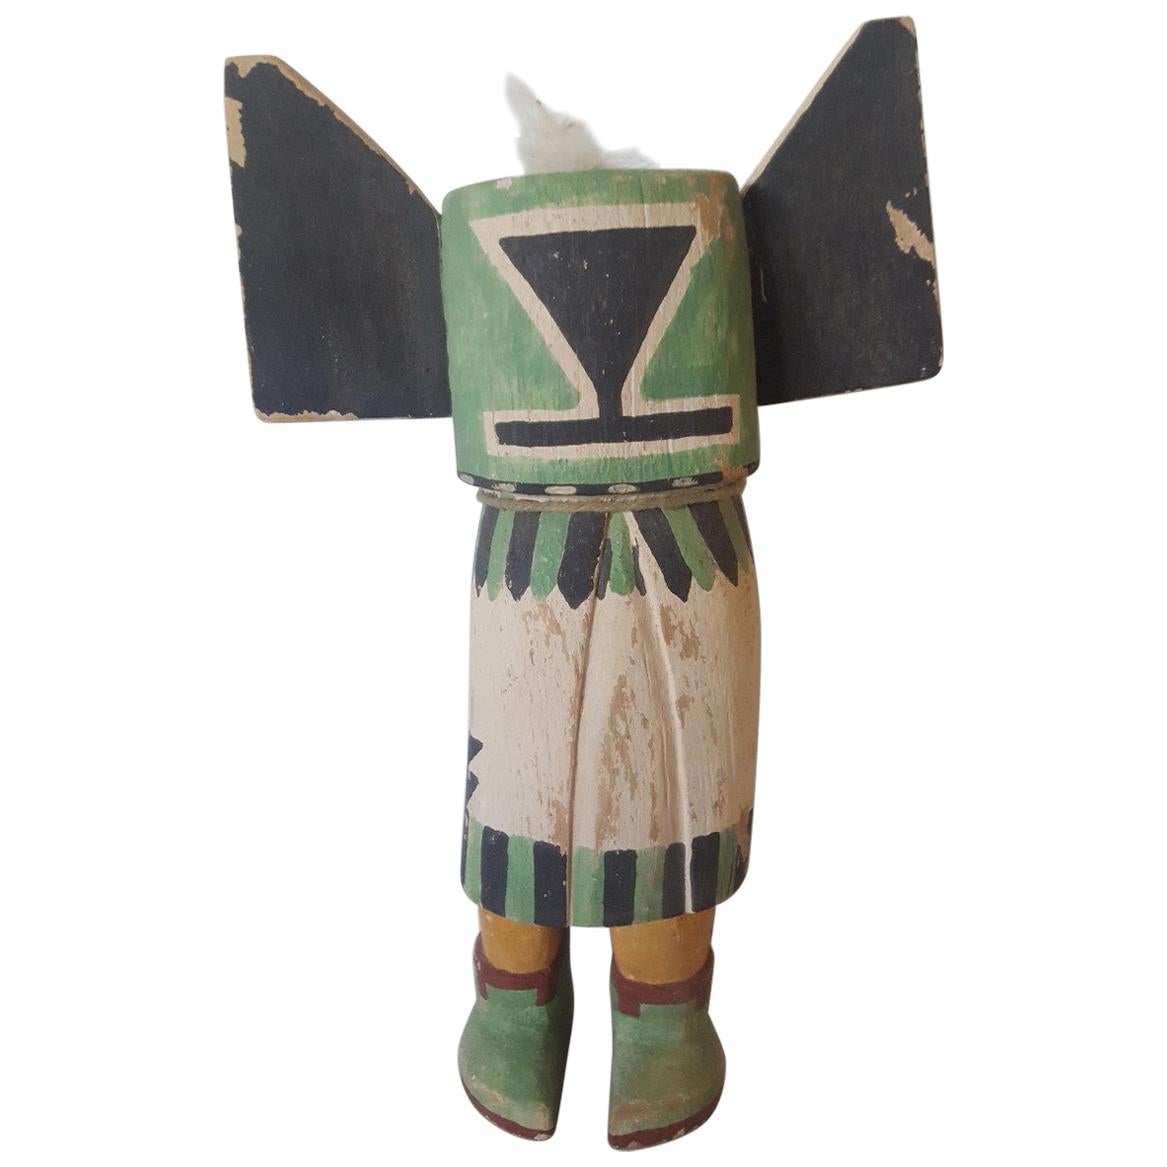 20th Century Replica of Hopi Kachina Doll, Hand-Carved and Painted Cotton Wood